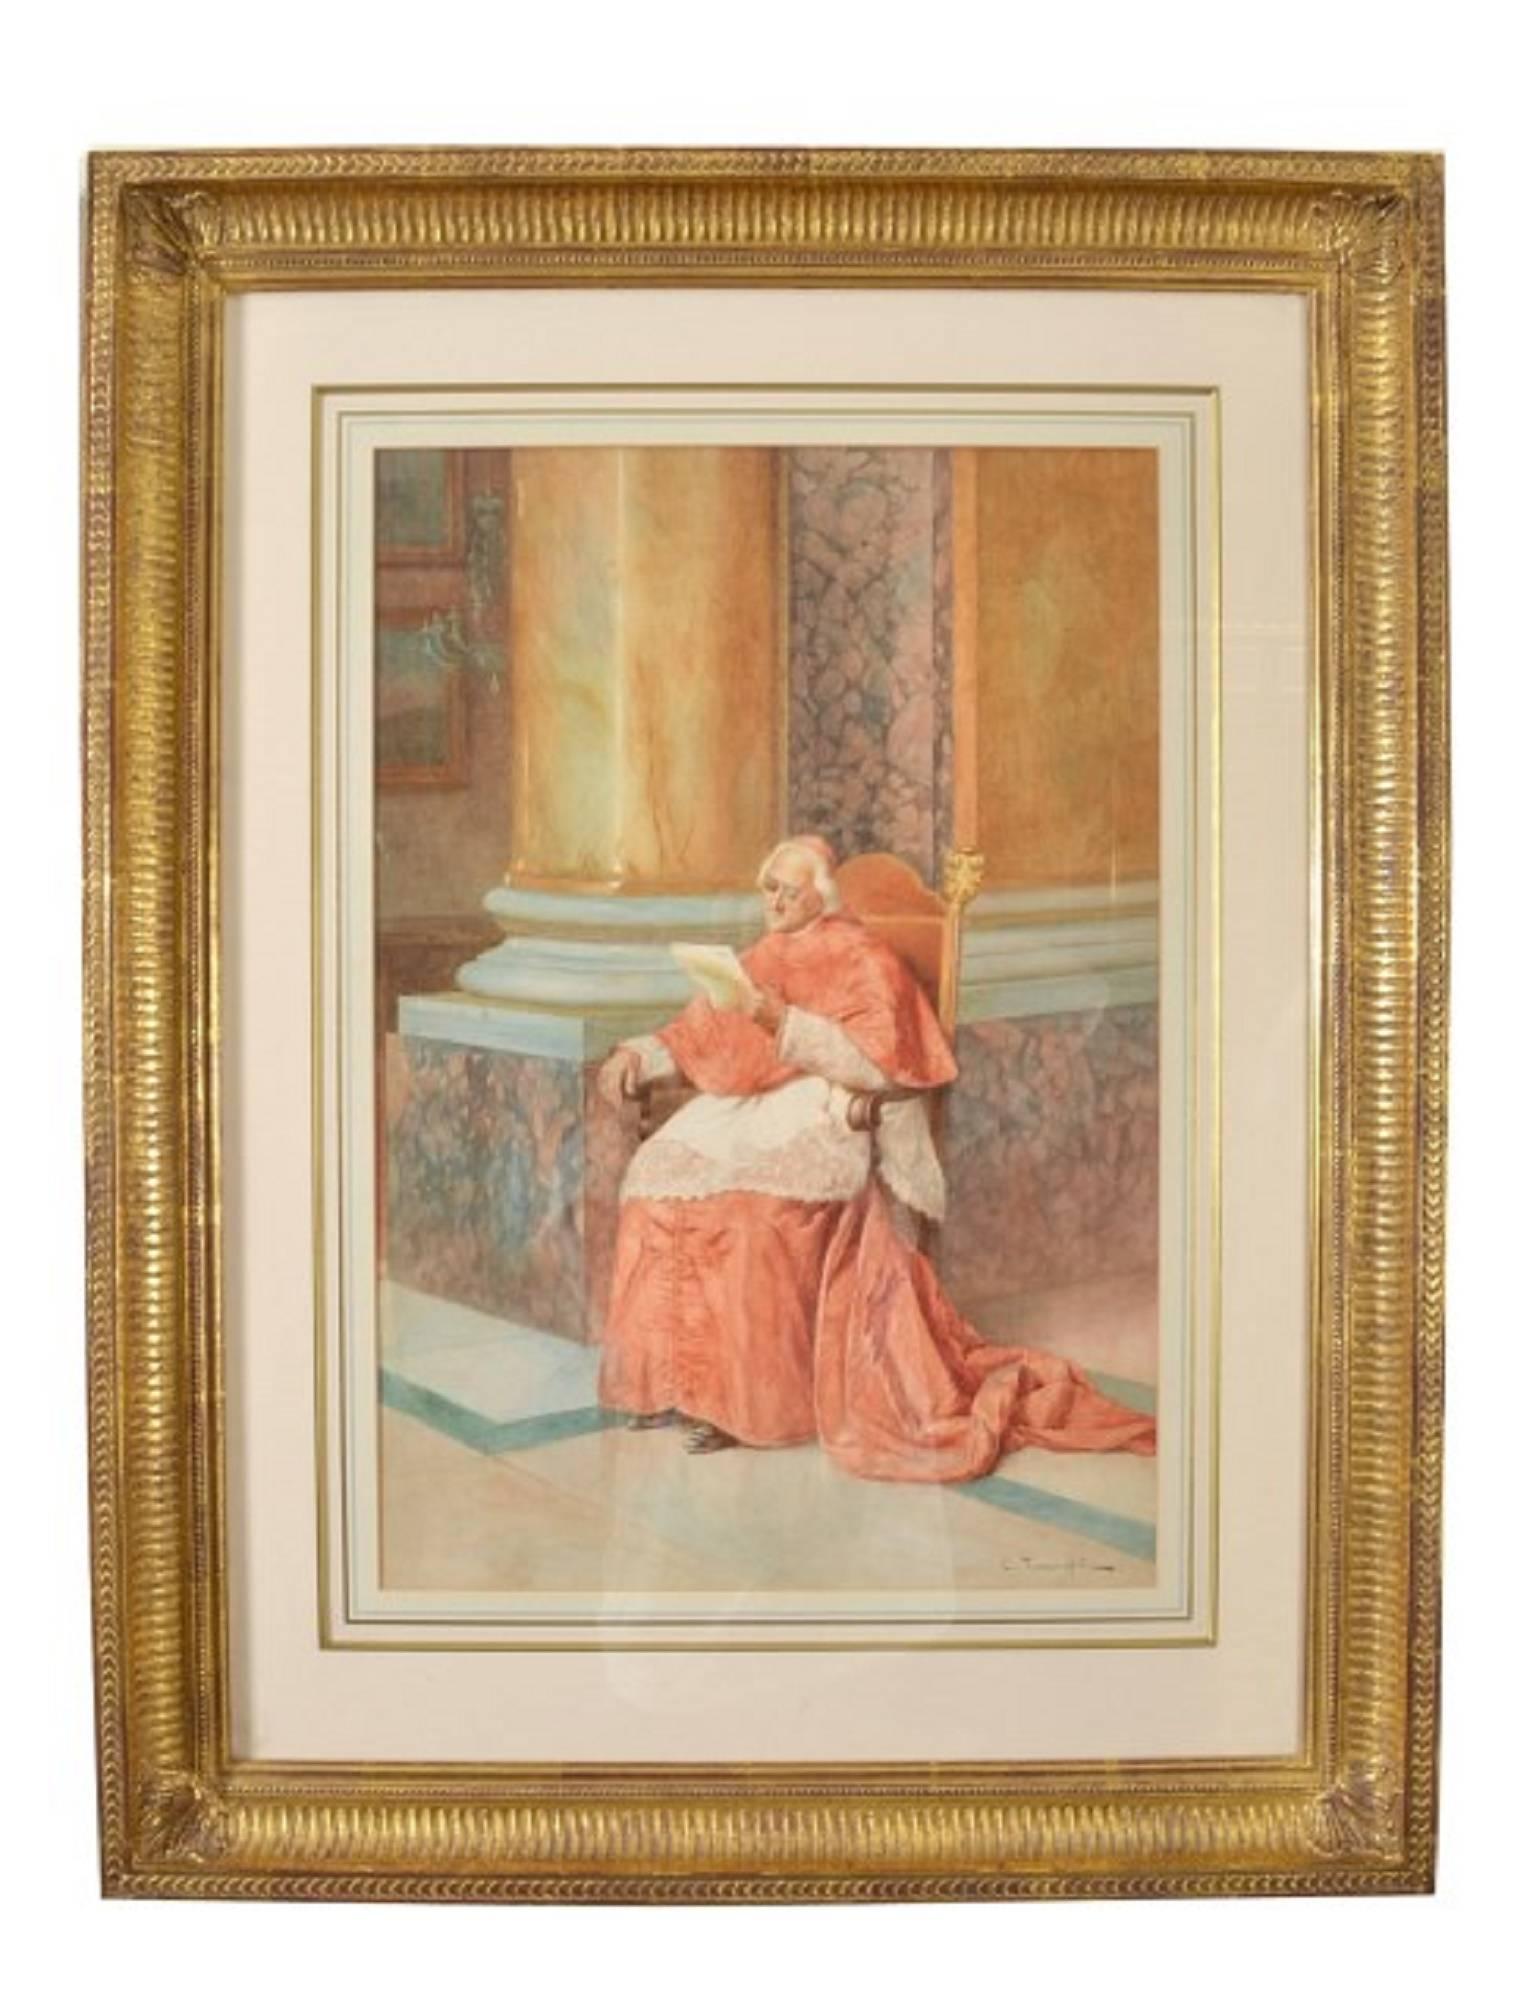 This is a fabulous pair of antique watercolours entitled 'The Cardinals' by Enrico Tarenghi, circa 1910.

They are skillfully executed in pencil over watercolour. Each depicts a cardinal, against the same background - outside a basilica. Both